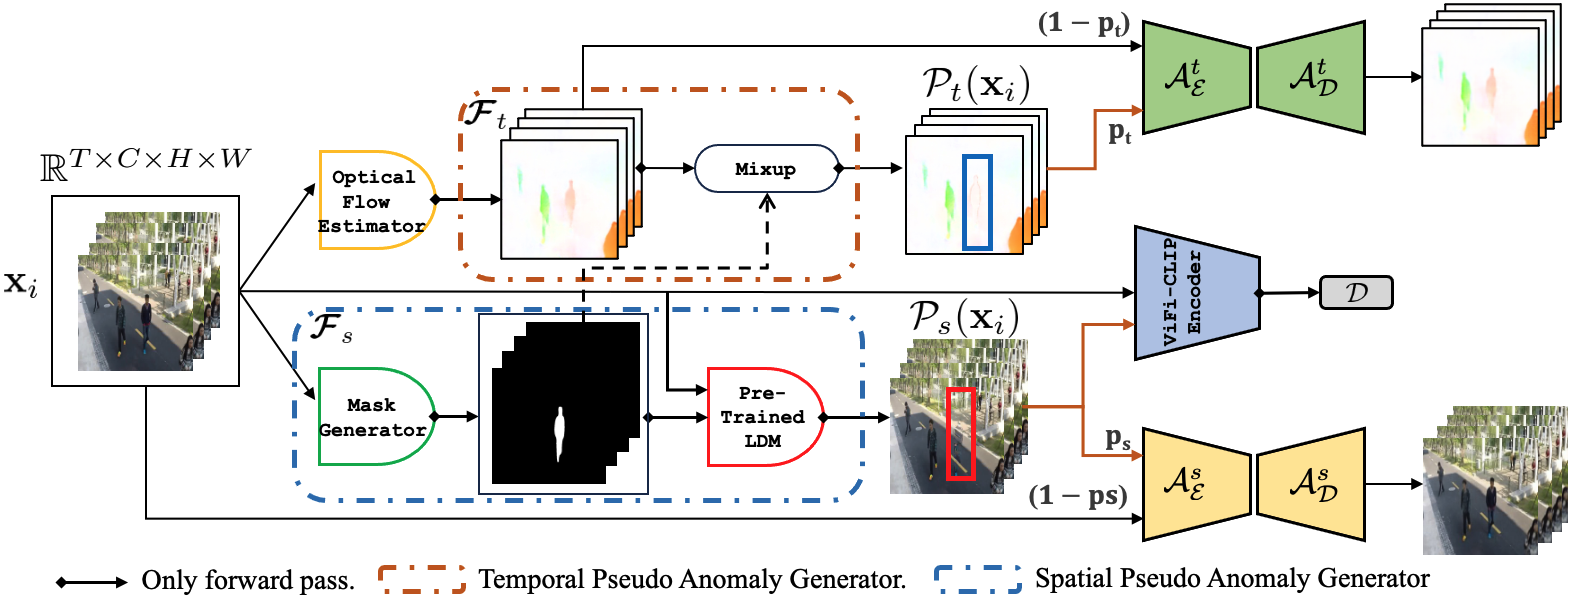 Video Anomaly Detection via Spatio-Temporal Pseudo-Anomaly Generation : A Unified Approach